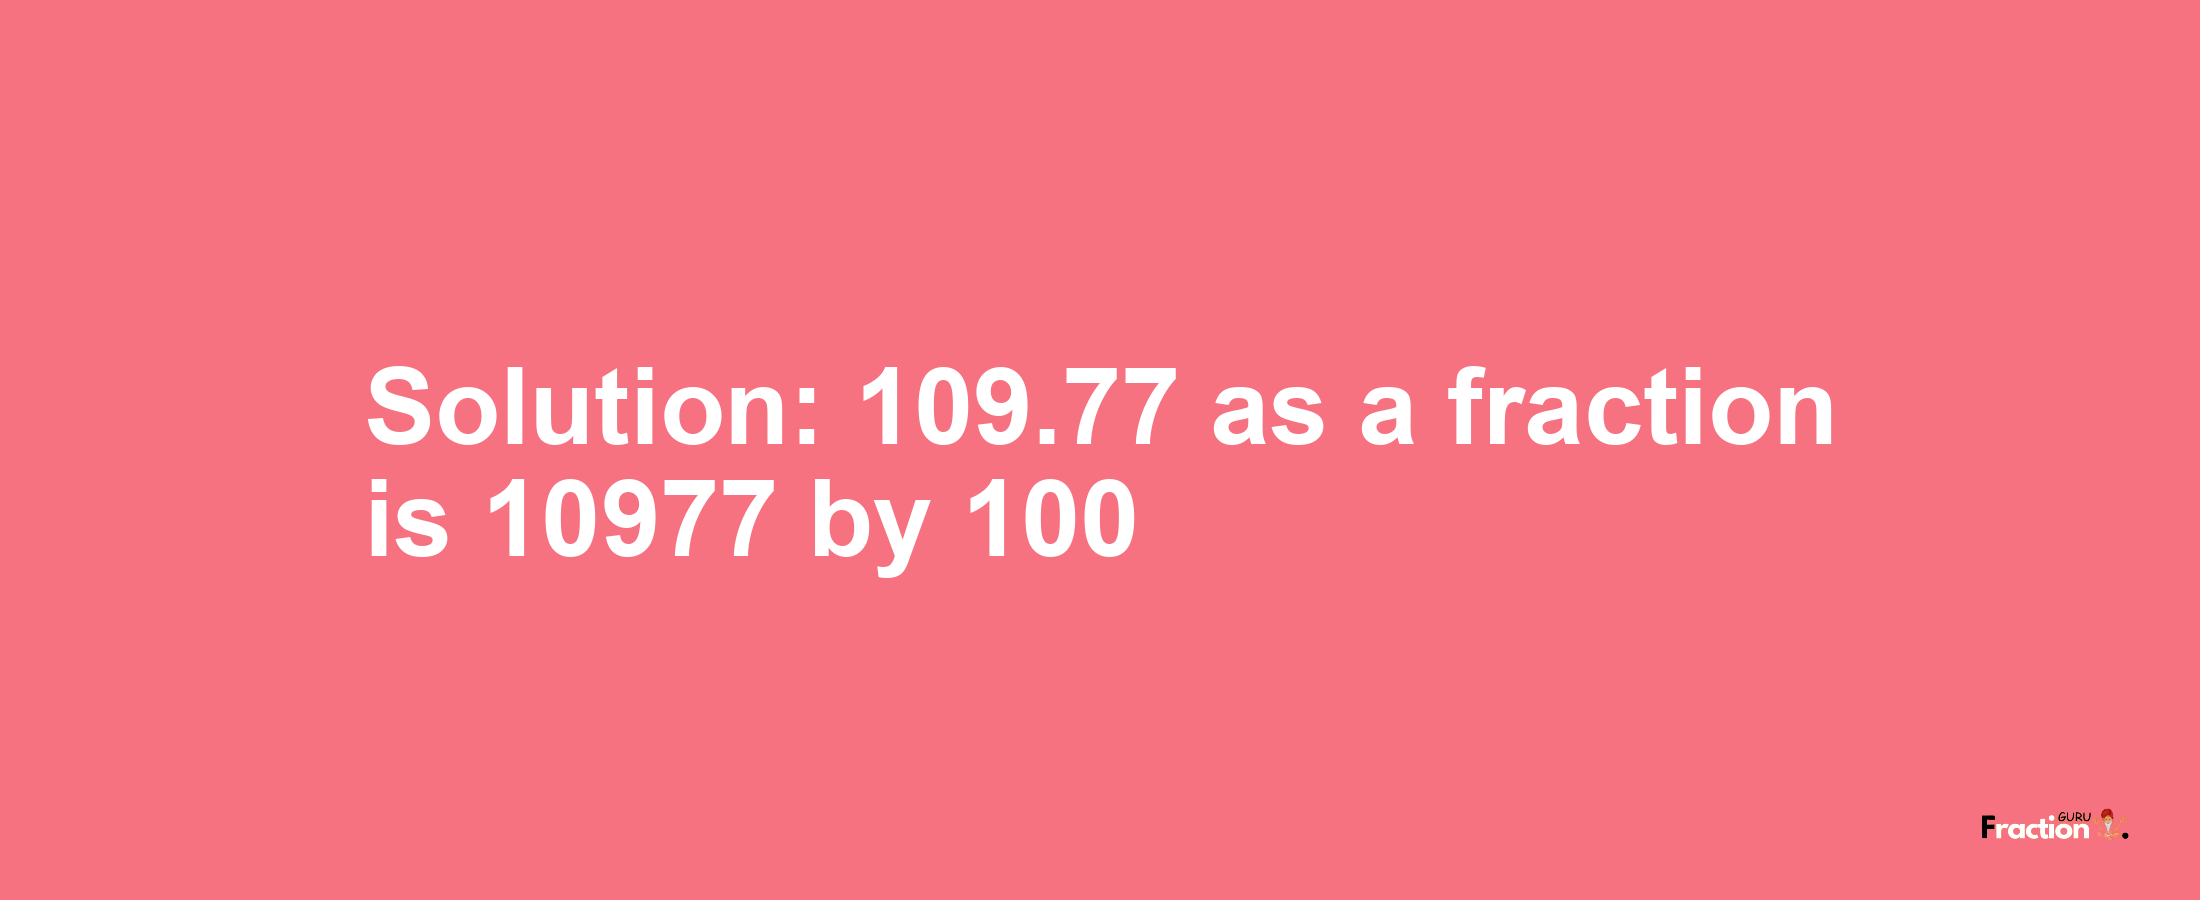 Solution:109.77 as a fraction is 10977/100